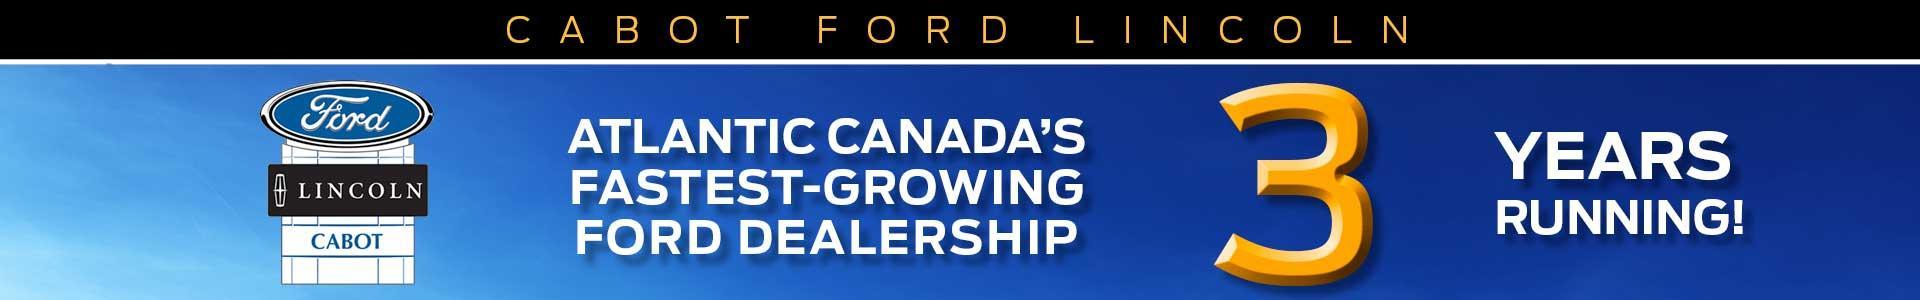 Atlantic Canada's fastest growing Ford dealership, 3 years running!